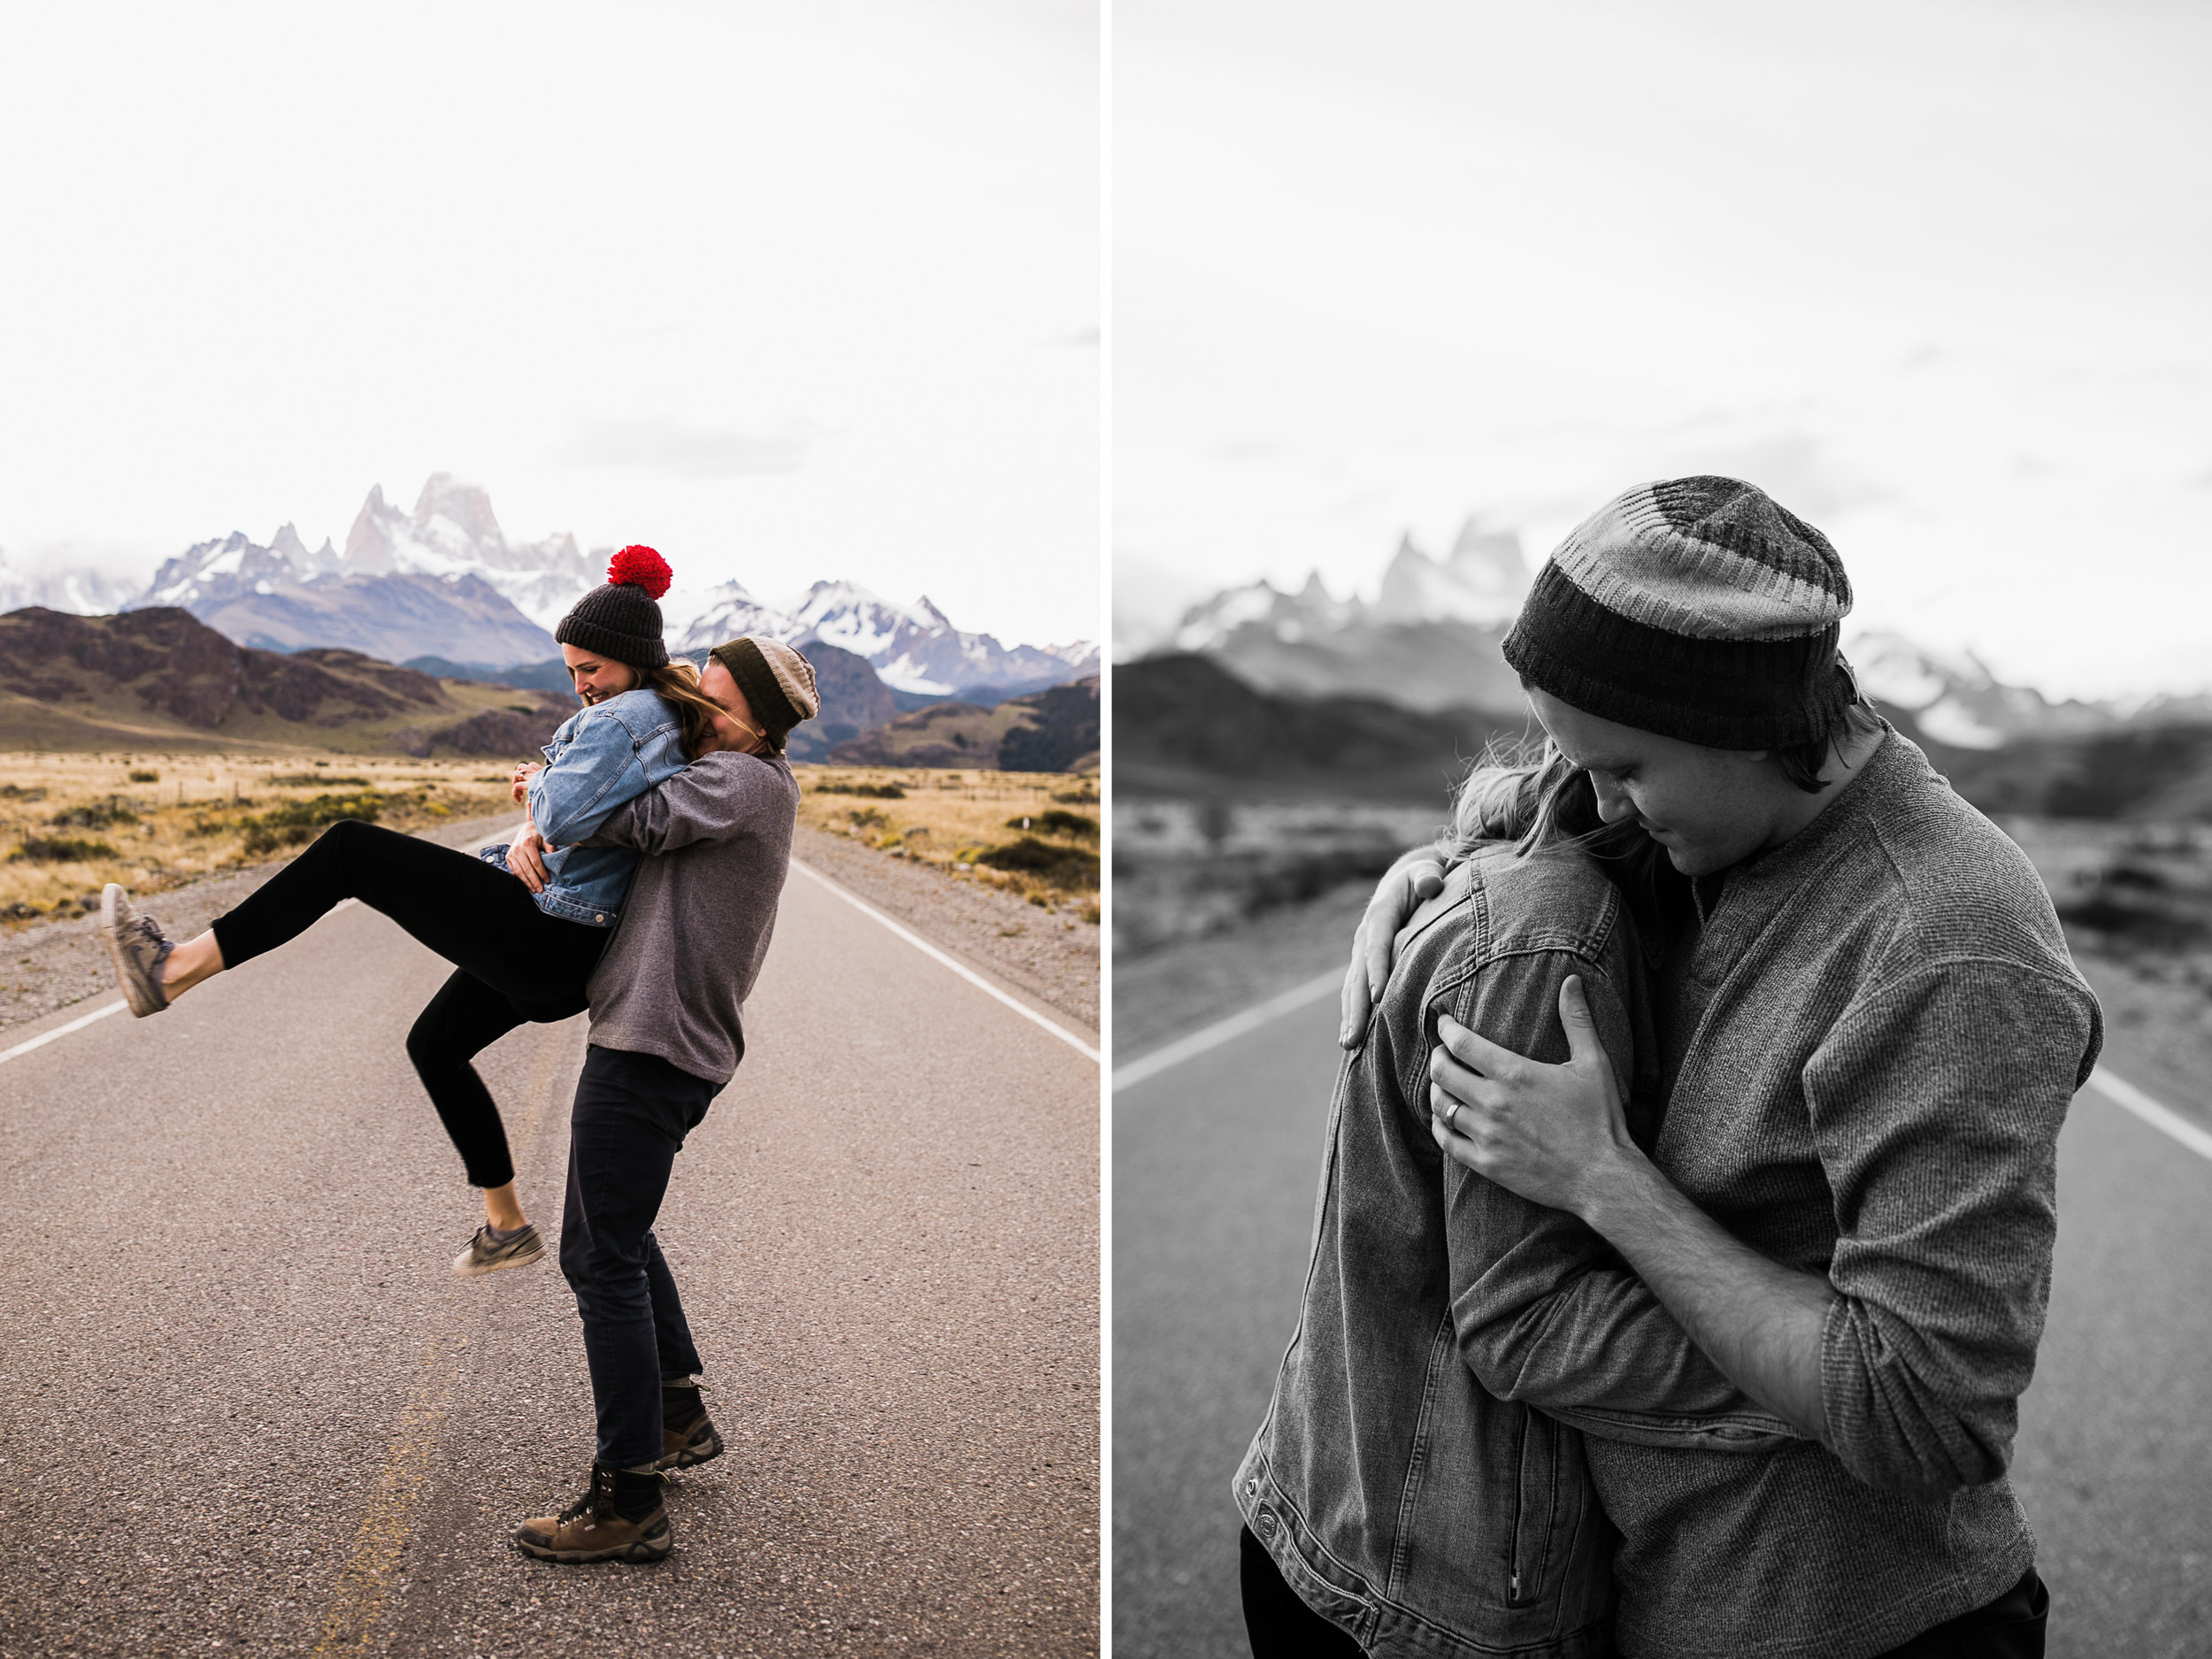 rich + anni's adventure travel session in el chalten | fitz roy, patagonia, argentina | patagonia destination elopement photographer | the hearnes adventure photography | www.thehearnes.com